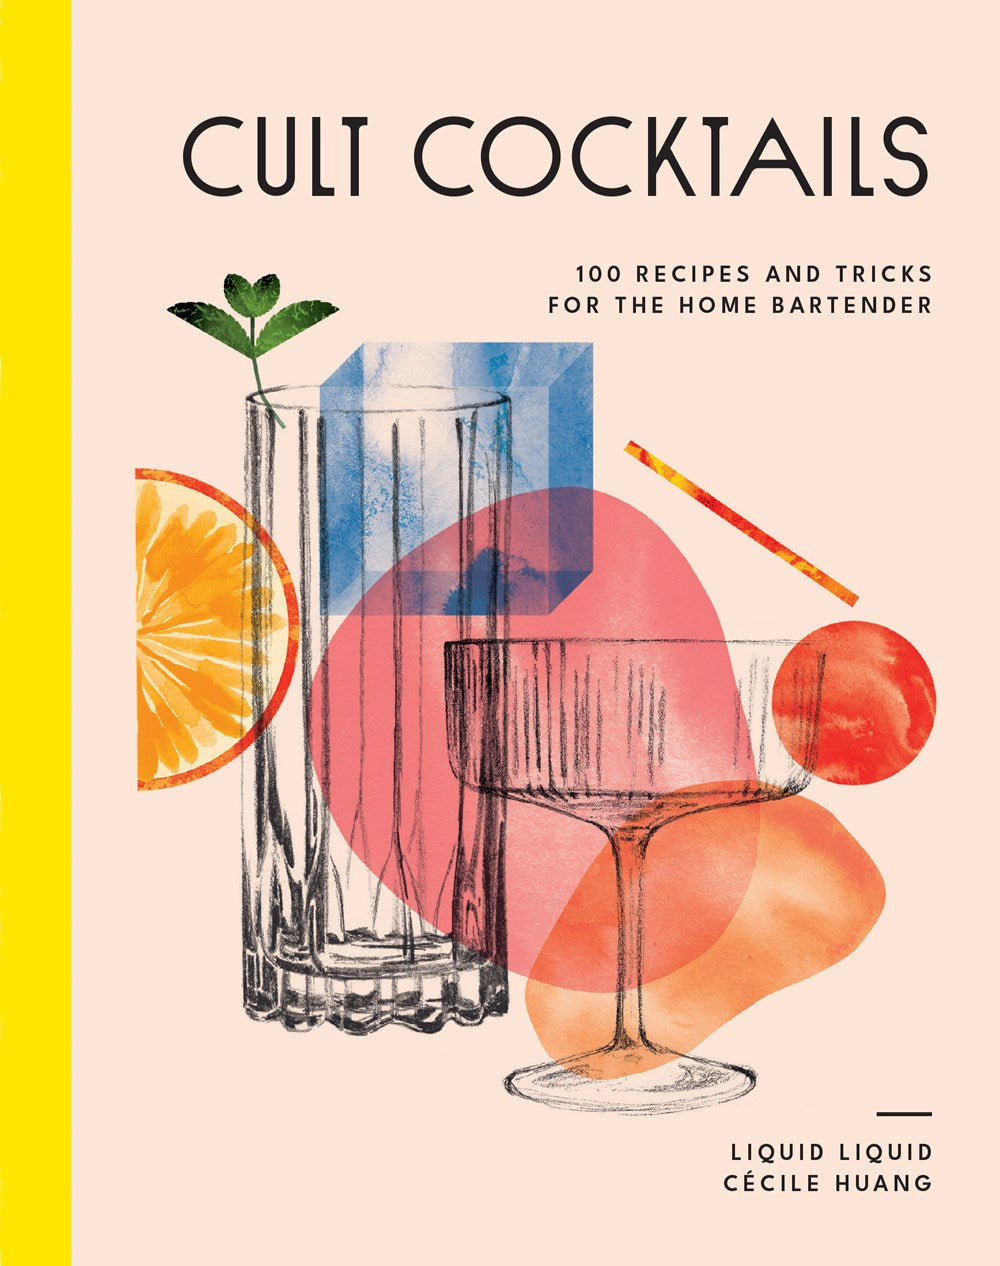 Cult Cocktails - 100 Recipes and Tricks for the Home Bartender